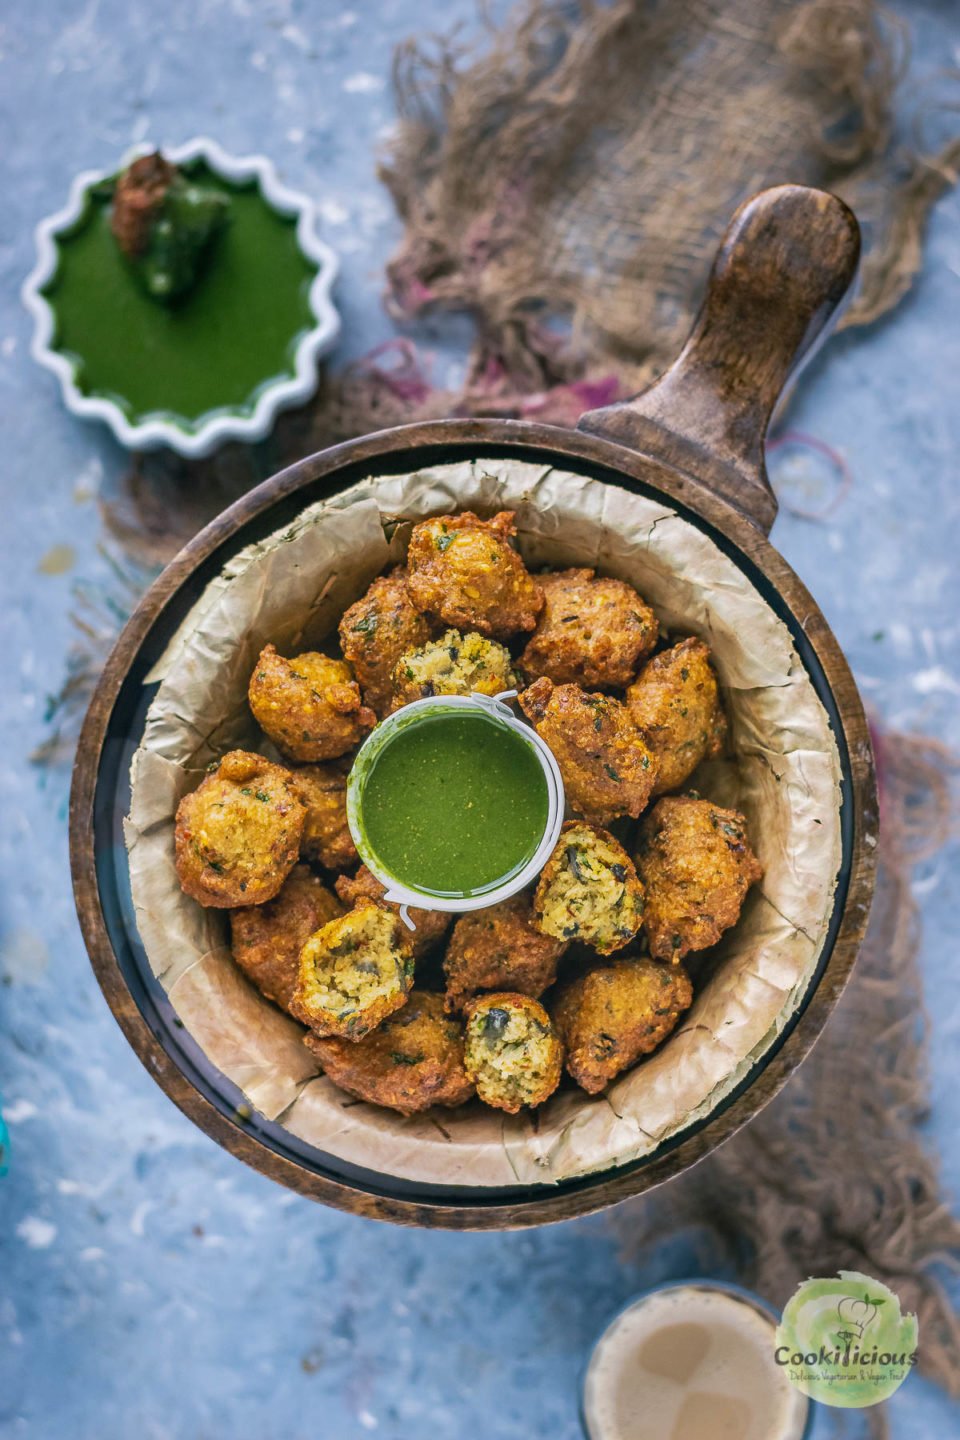 Crispy Moong Dal Pakora which is one of the easy vegan appetizers is placed in a round platter with a bowl of chutney in the middle and next to it